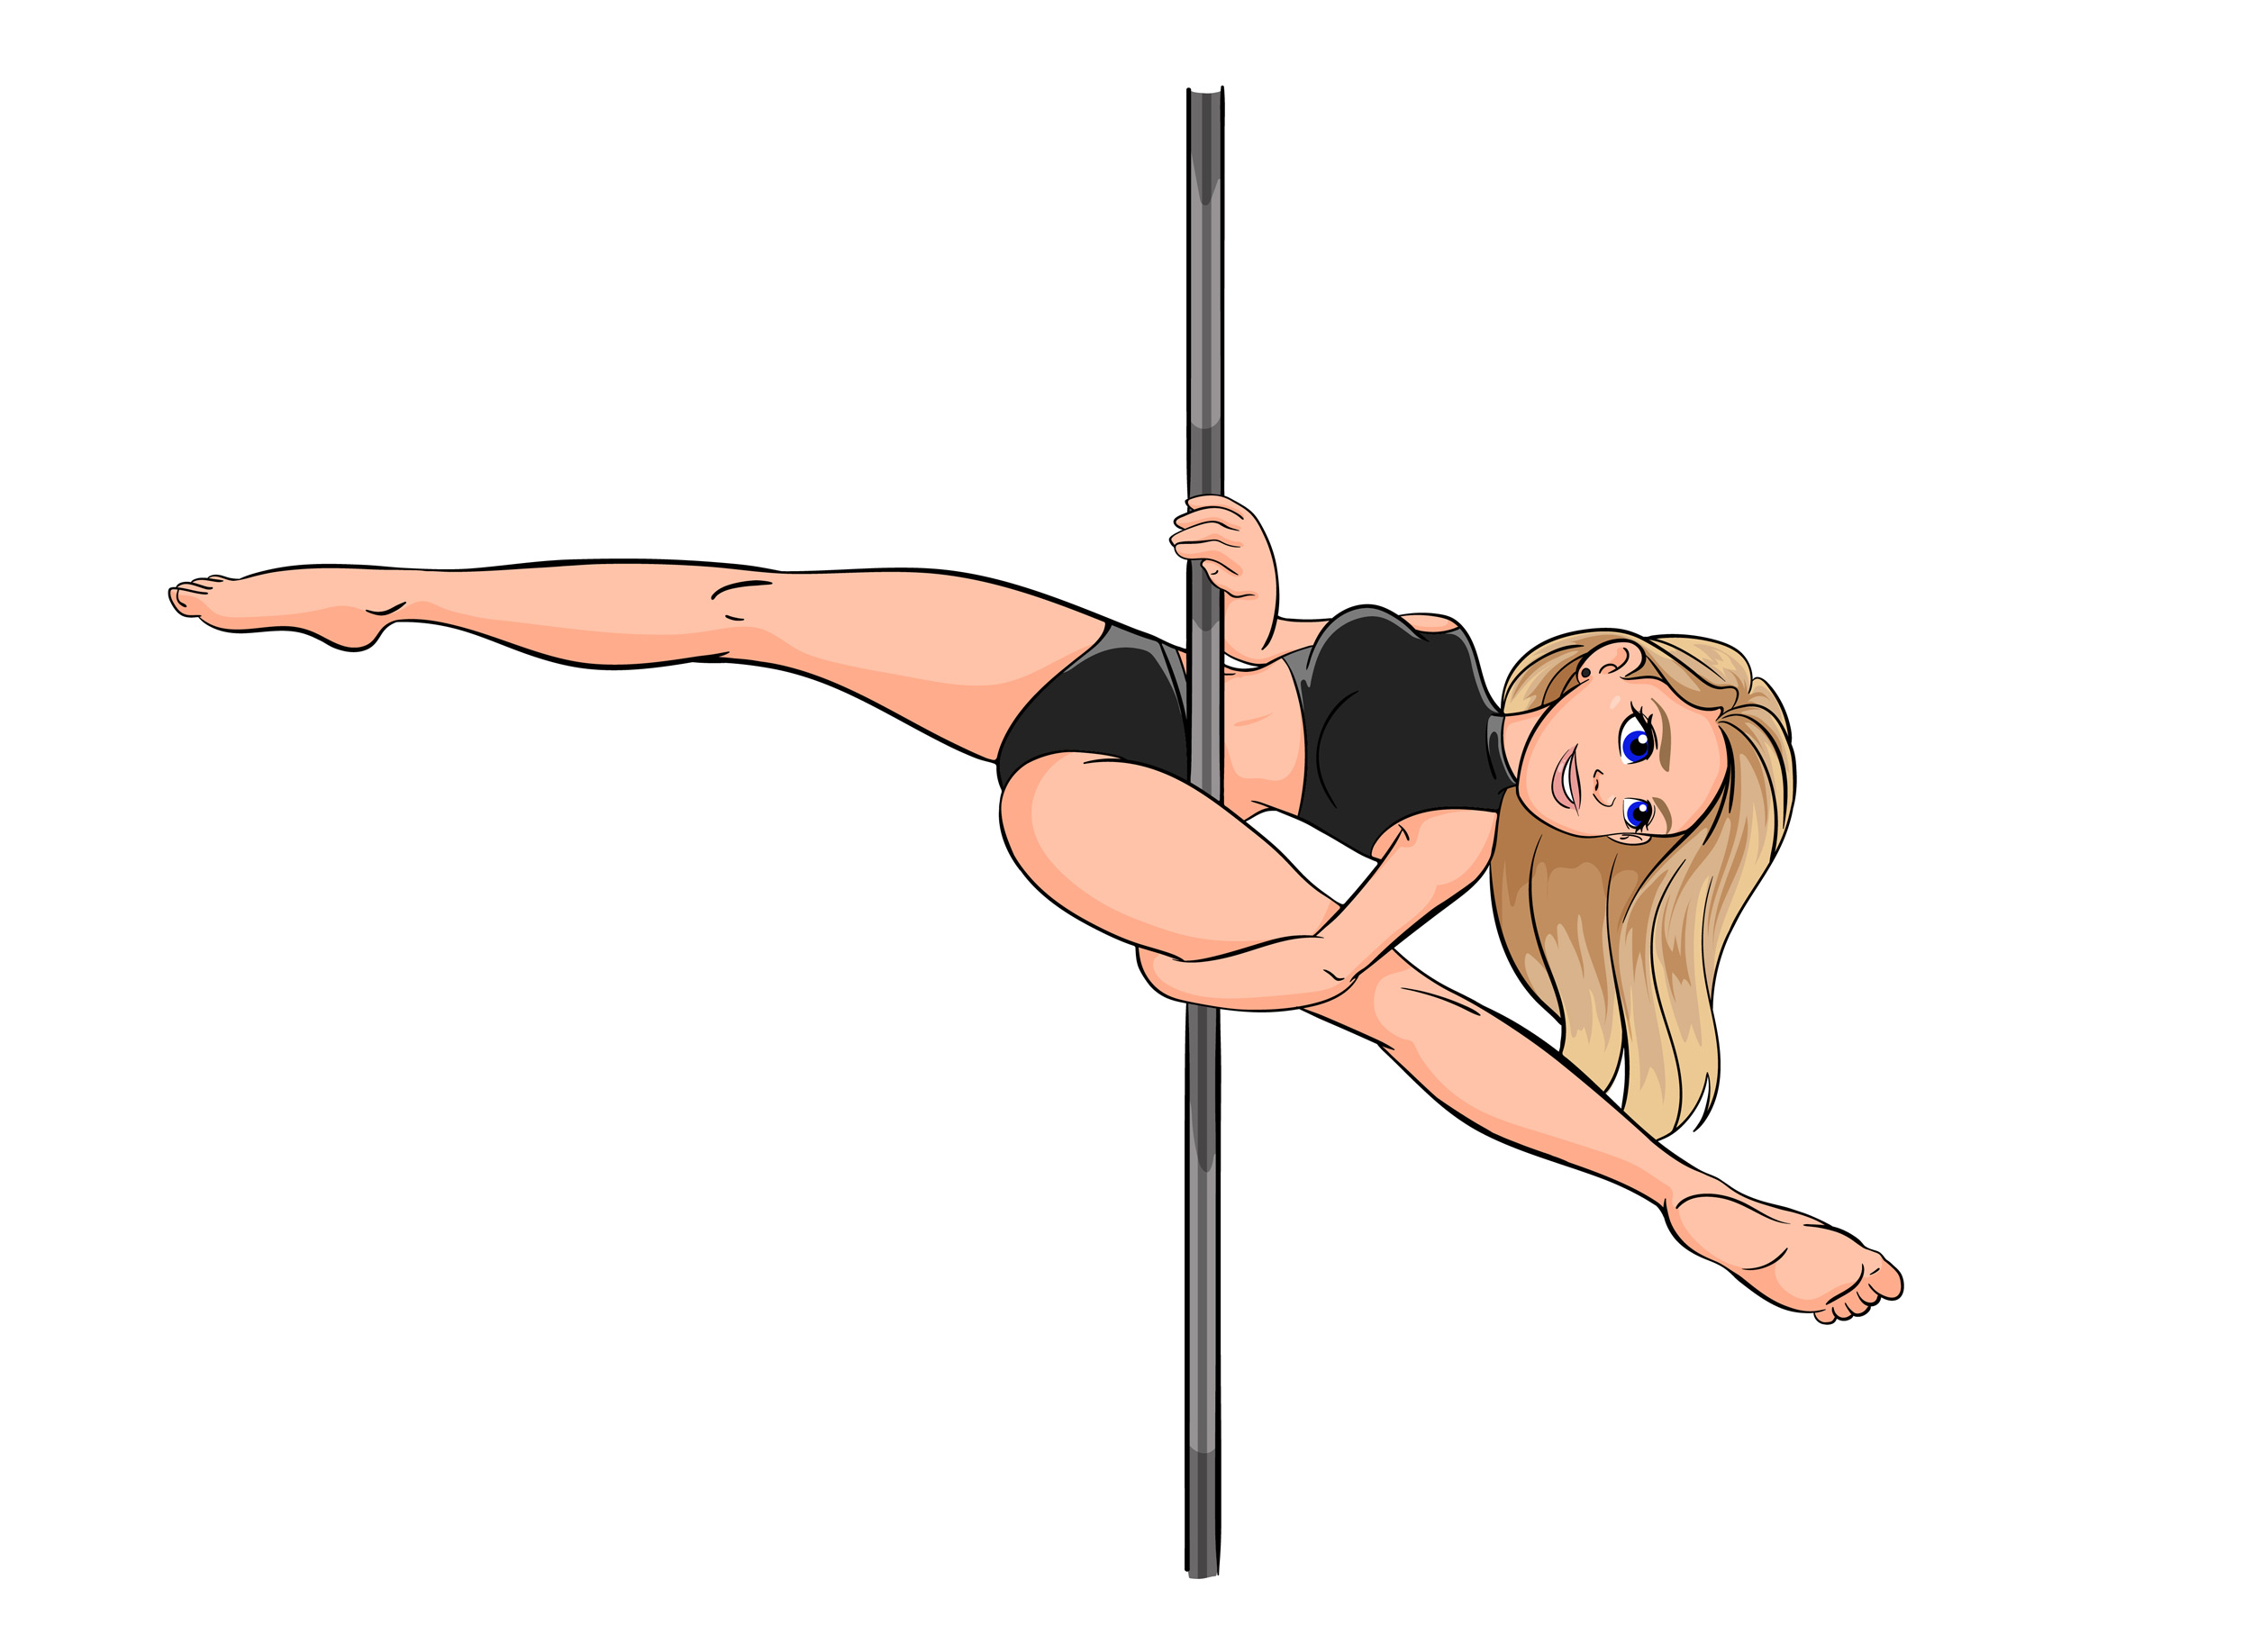 Cartoon drawing of The Pole Hub instructor Dee D holding a pose on a pole